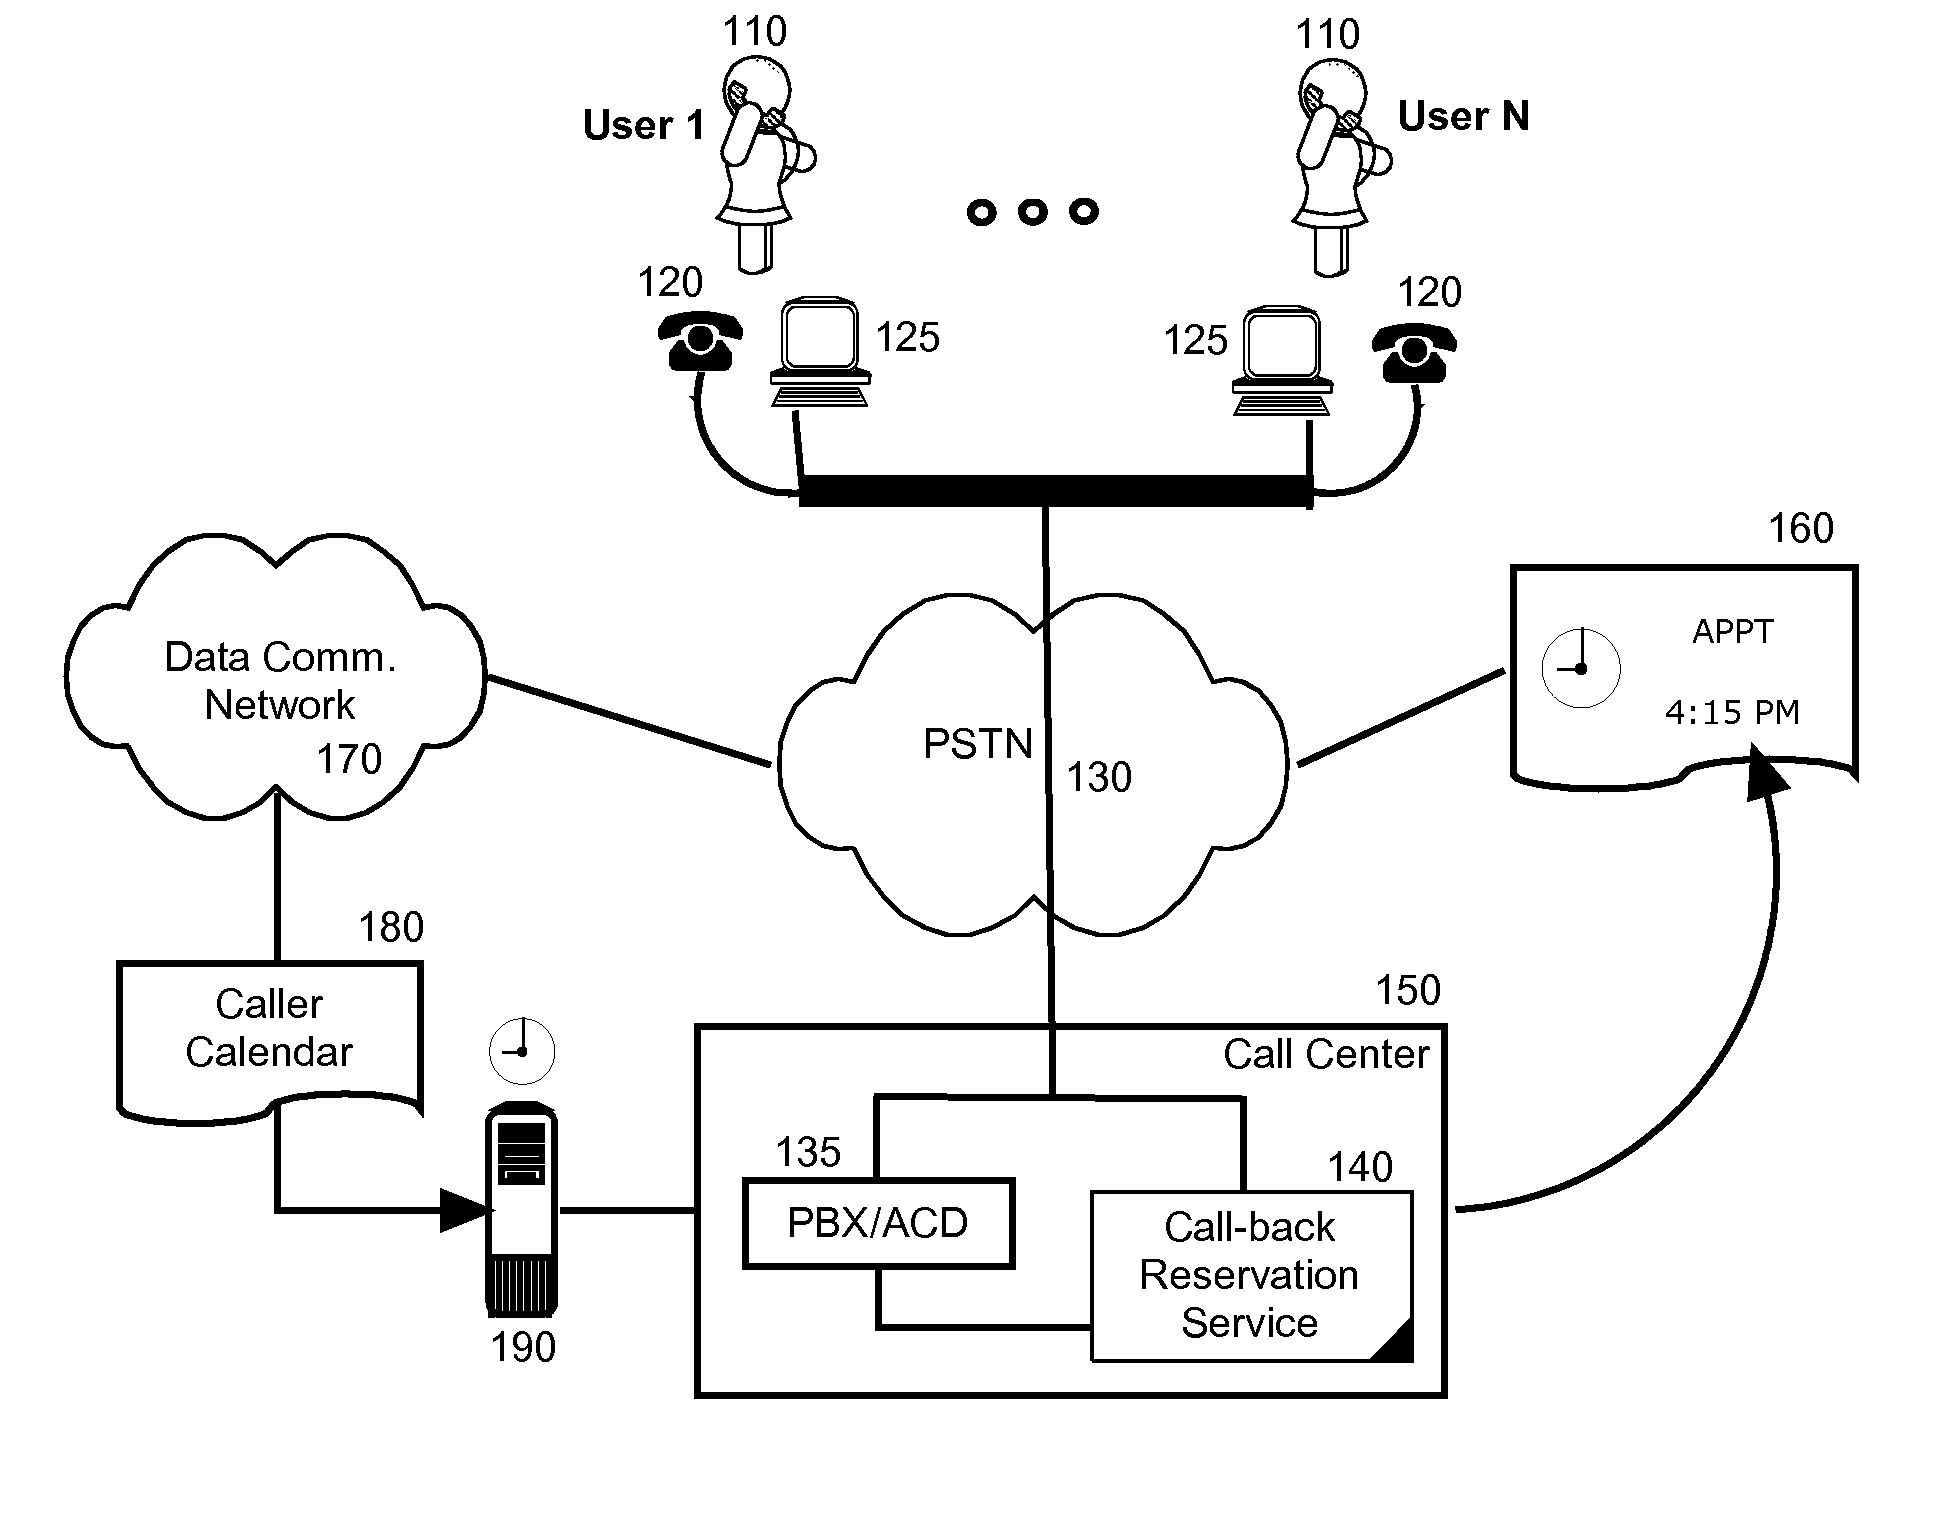 System for managing wait queues in a high volume system